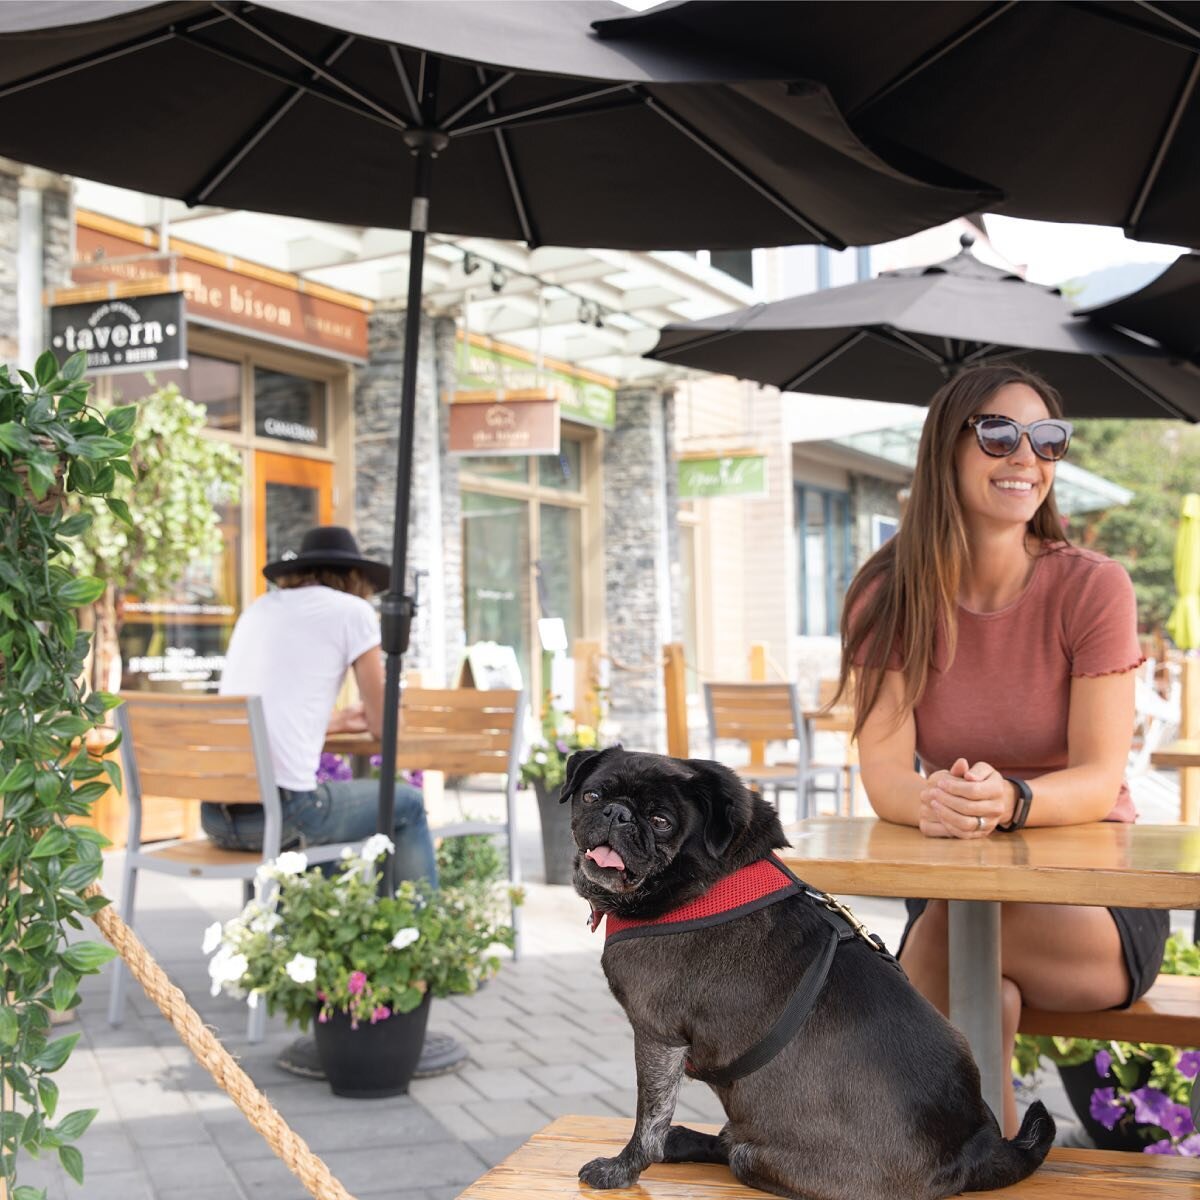 Join Wayne the pug on our sunny patios this weekend, and bring your best furry friend!

We&rsquo;ve got an extensive local craft beer selection to beat the heat, ridiculously good pizza and a special dog menu for Fido. 

#tavern #banff #patio #banffp